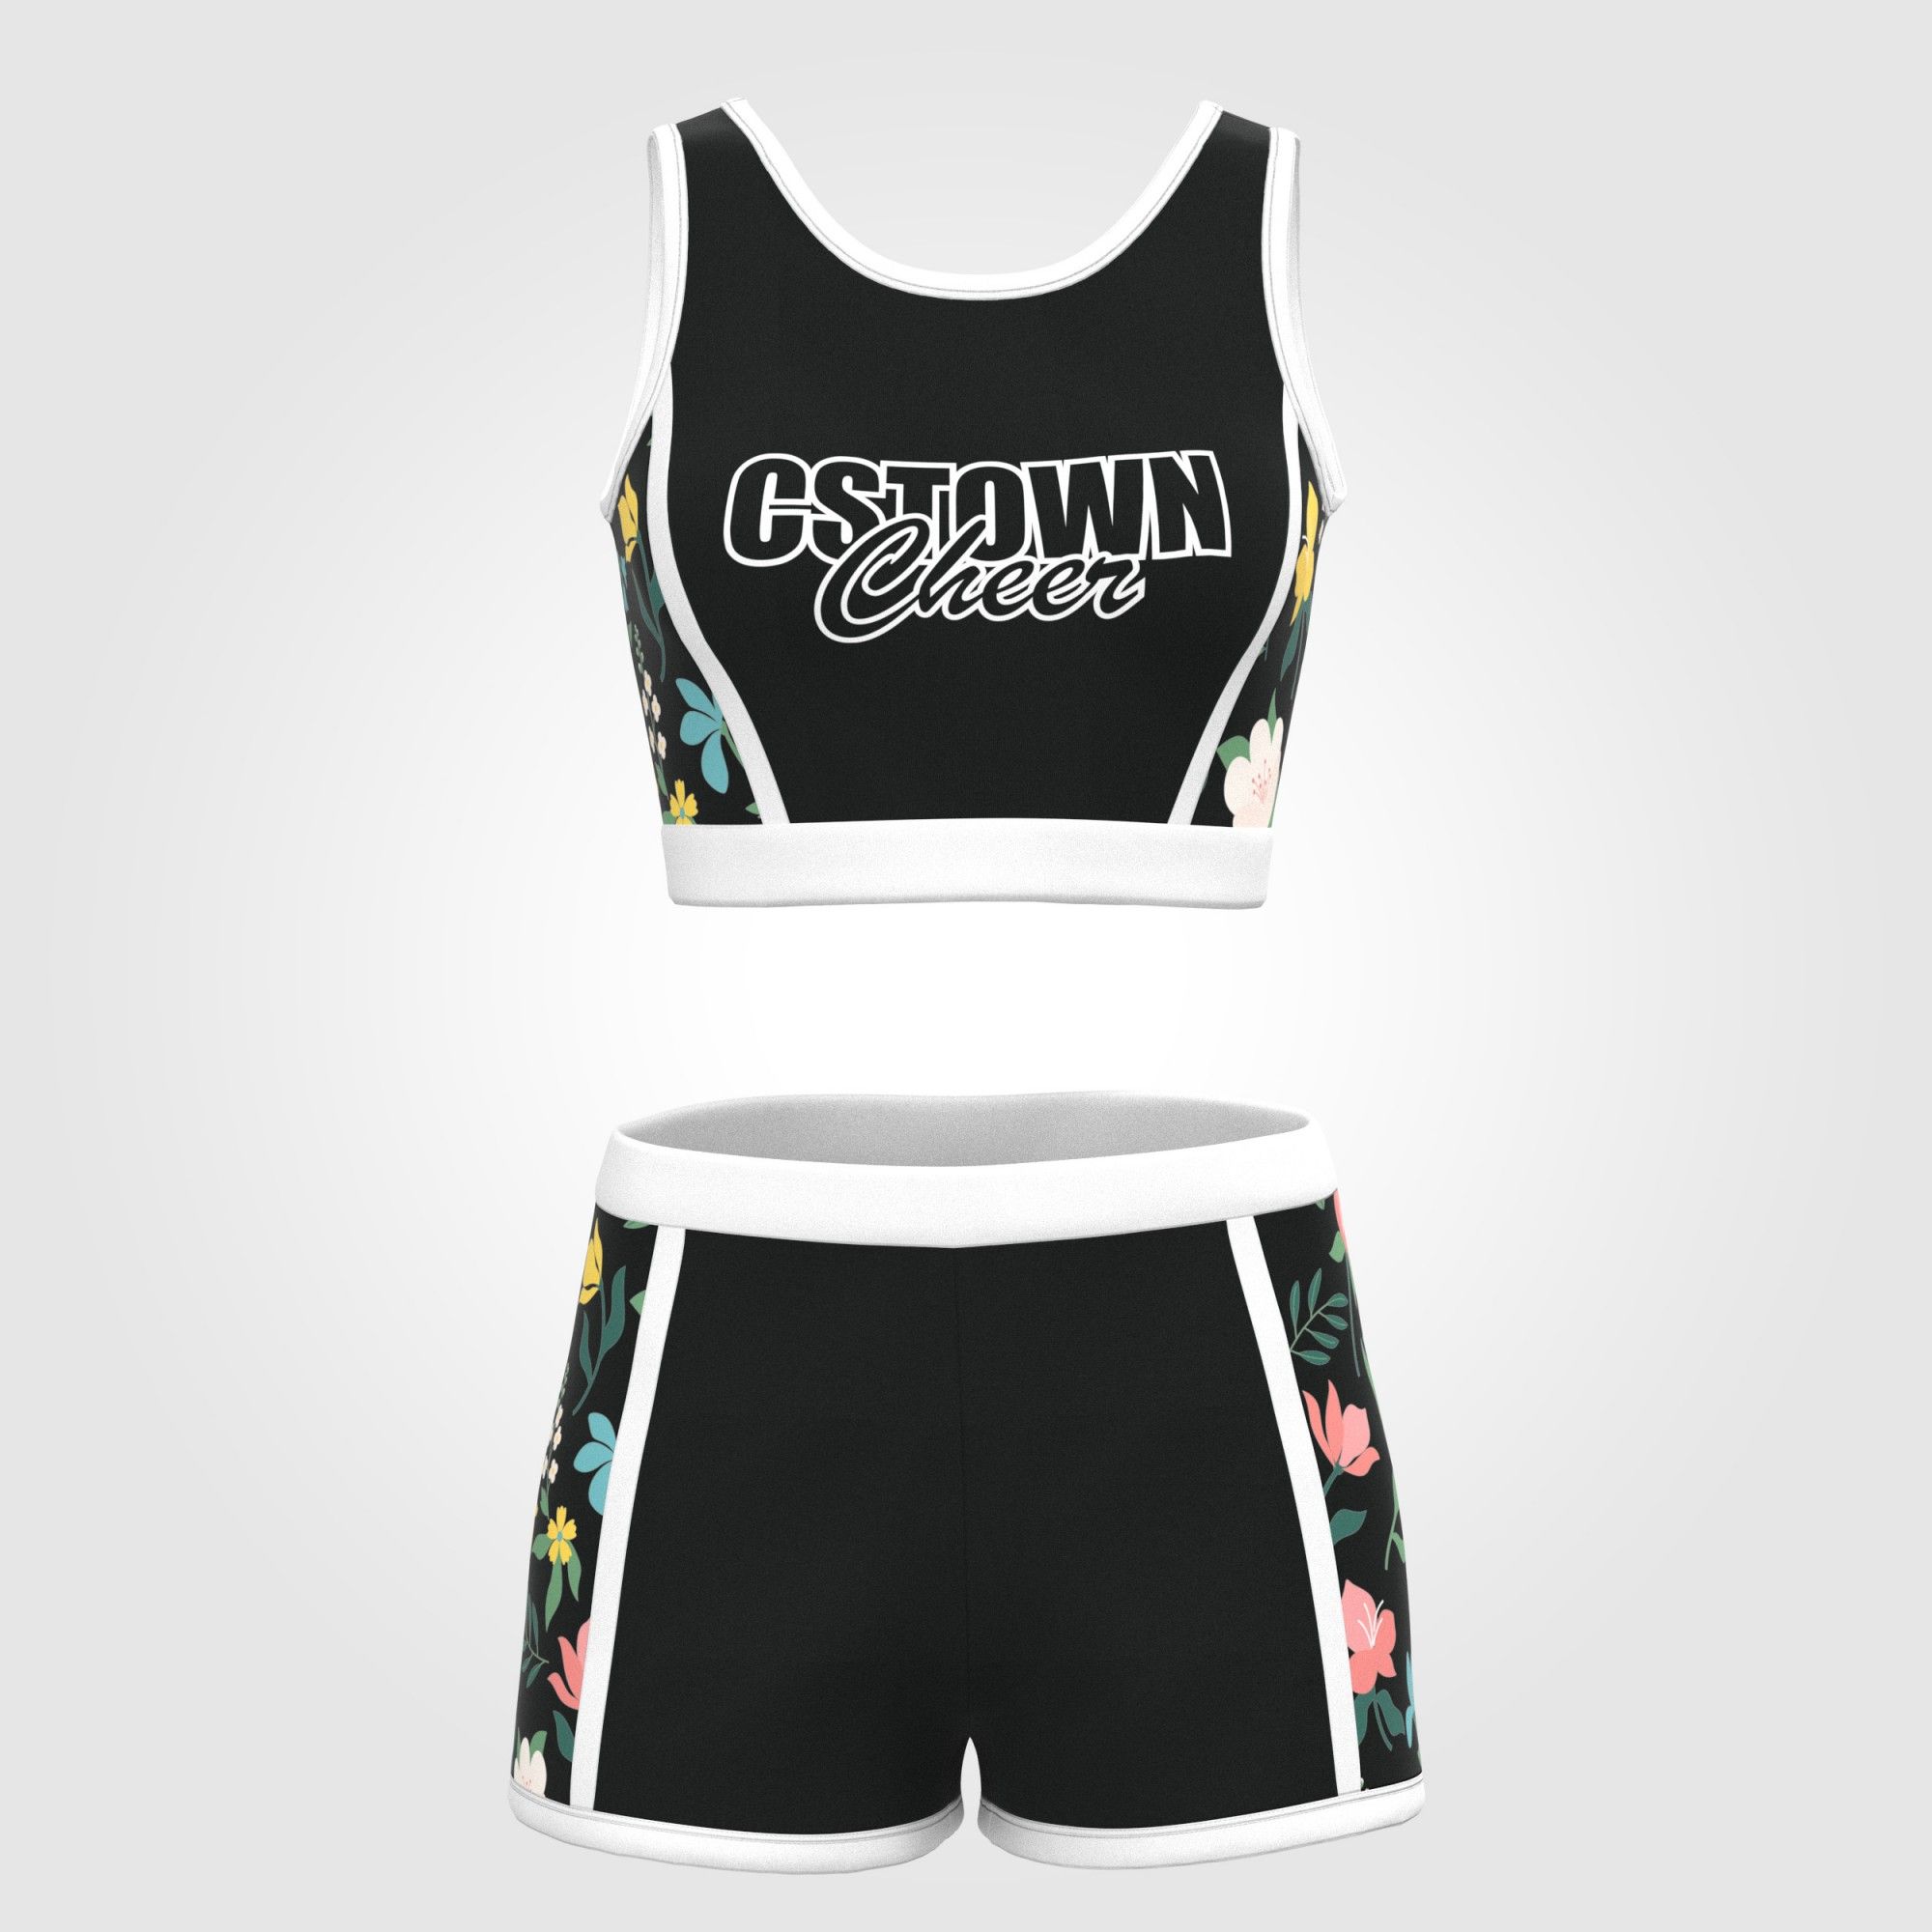 green and white drill team dance uniforms